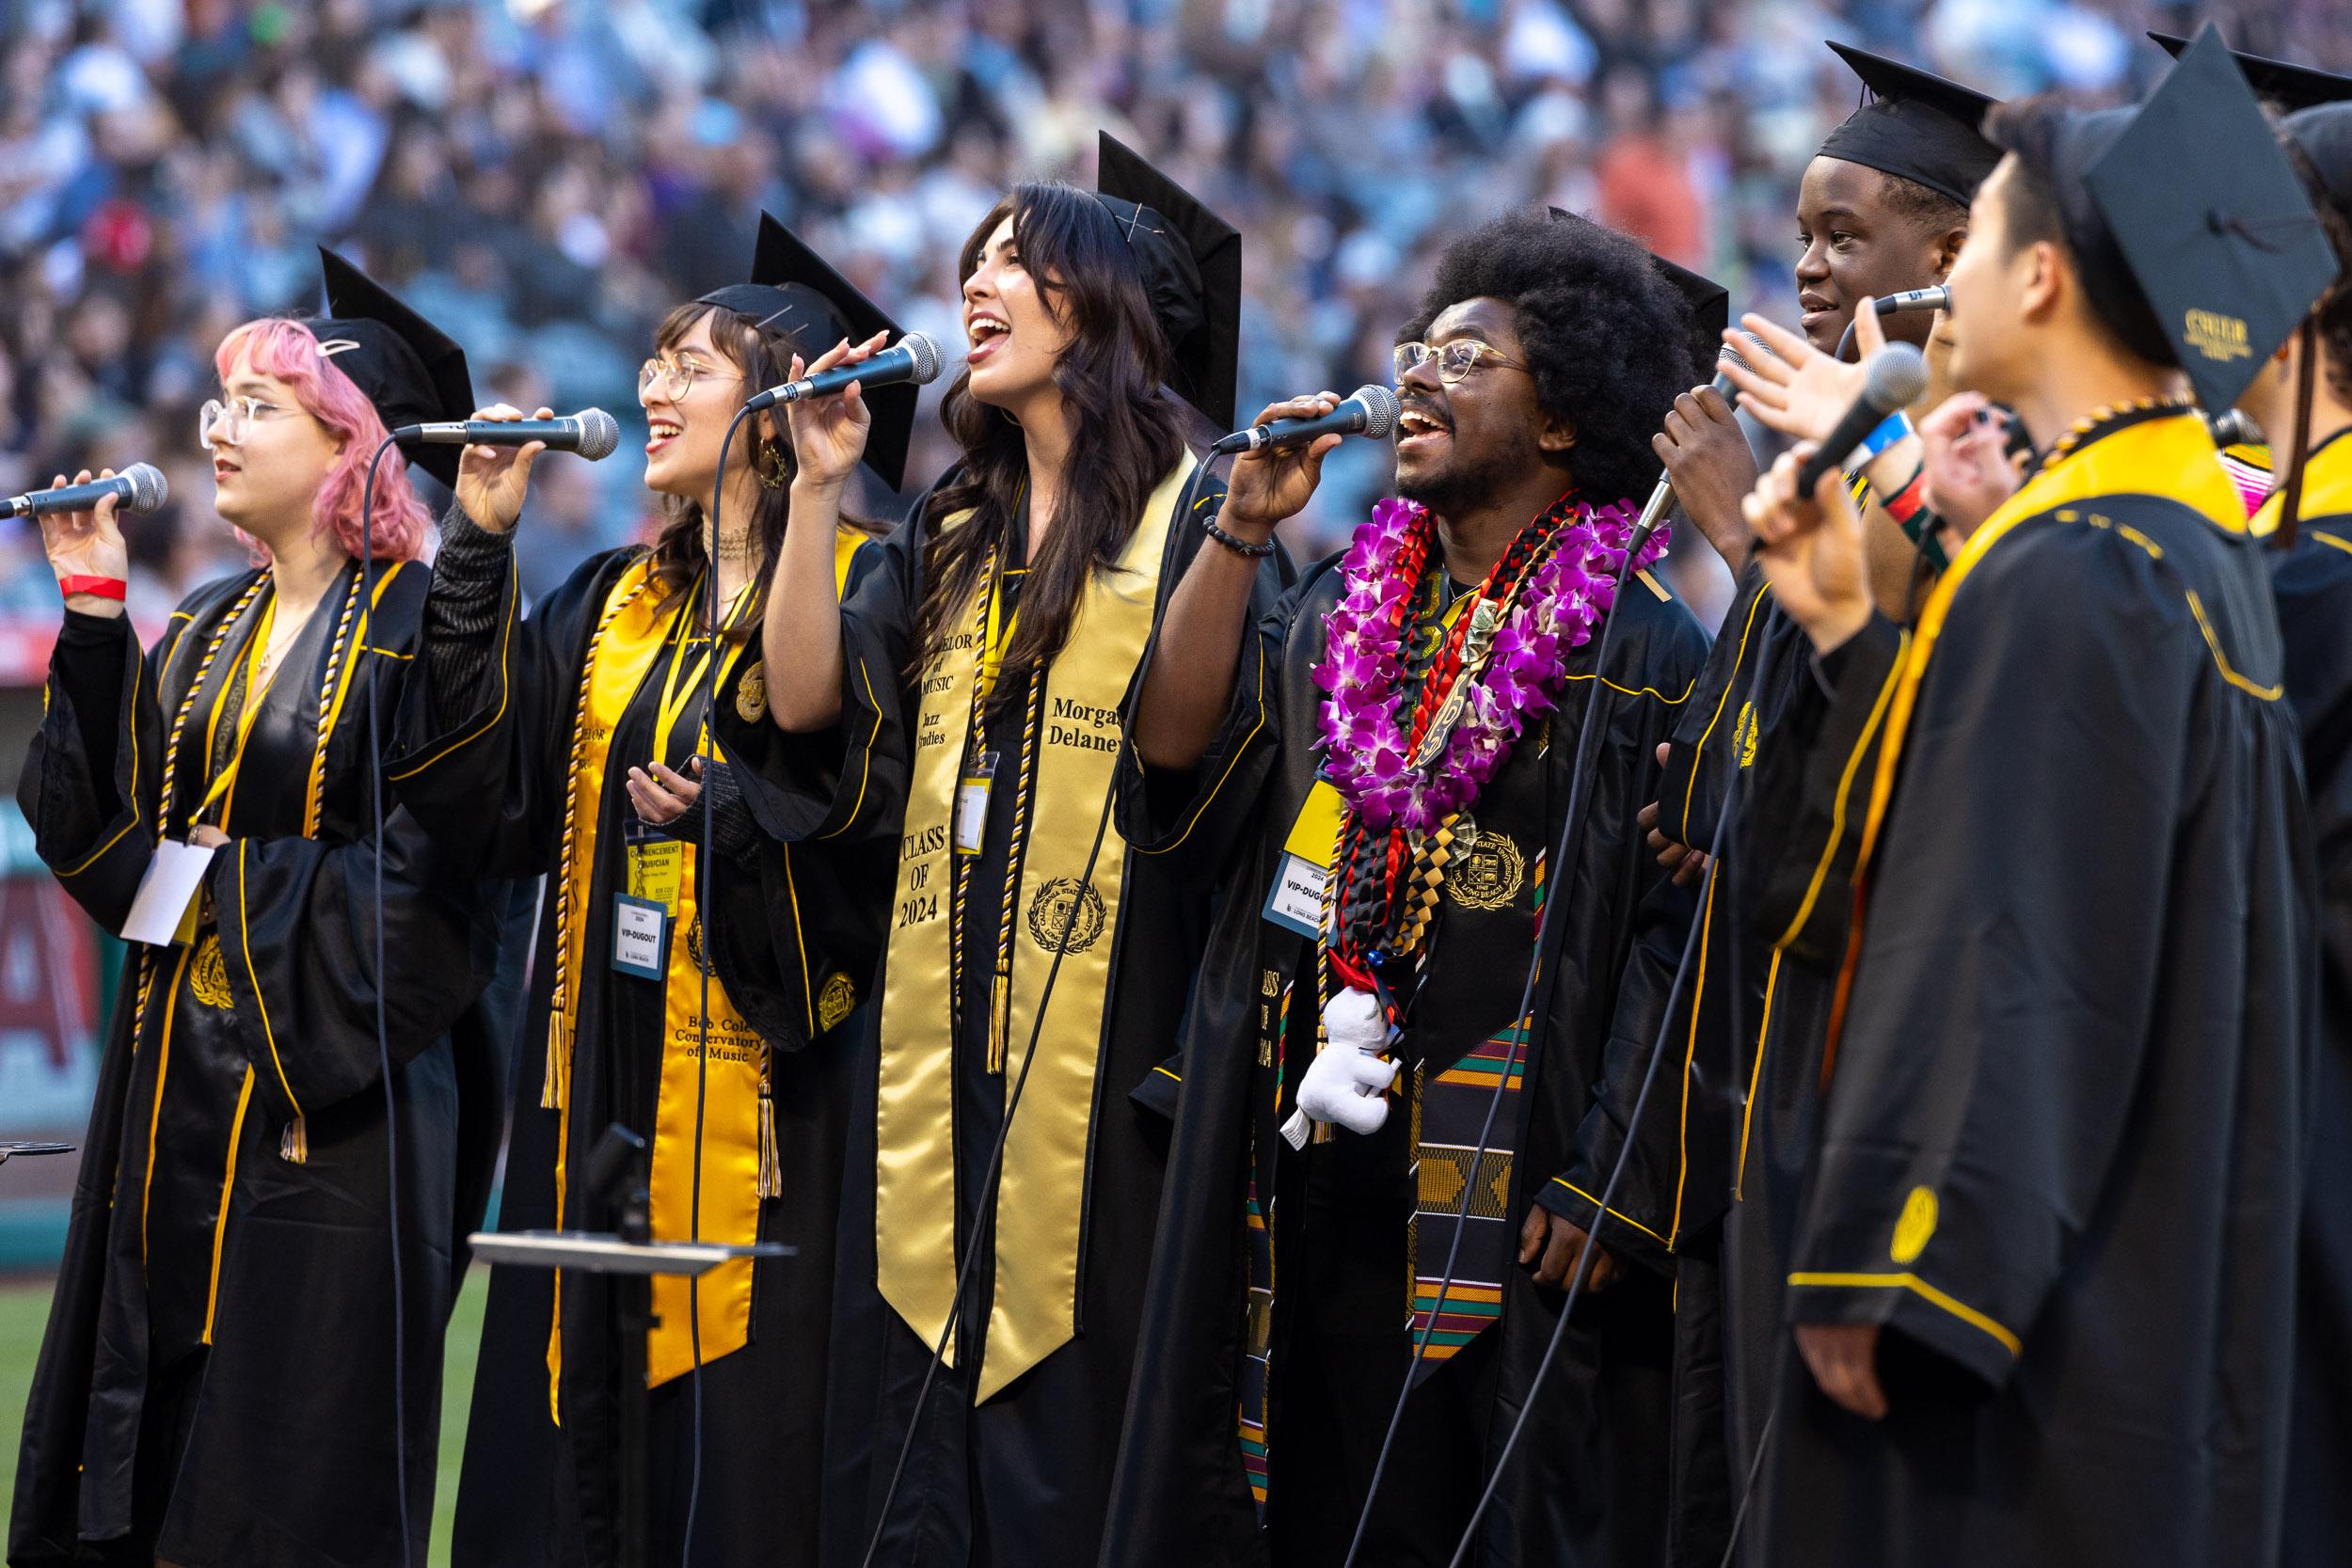 Music graduates sing at Commencement